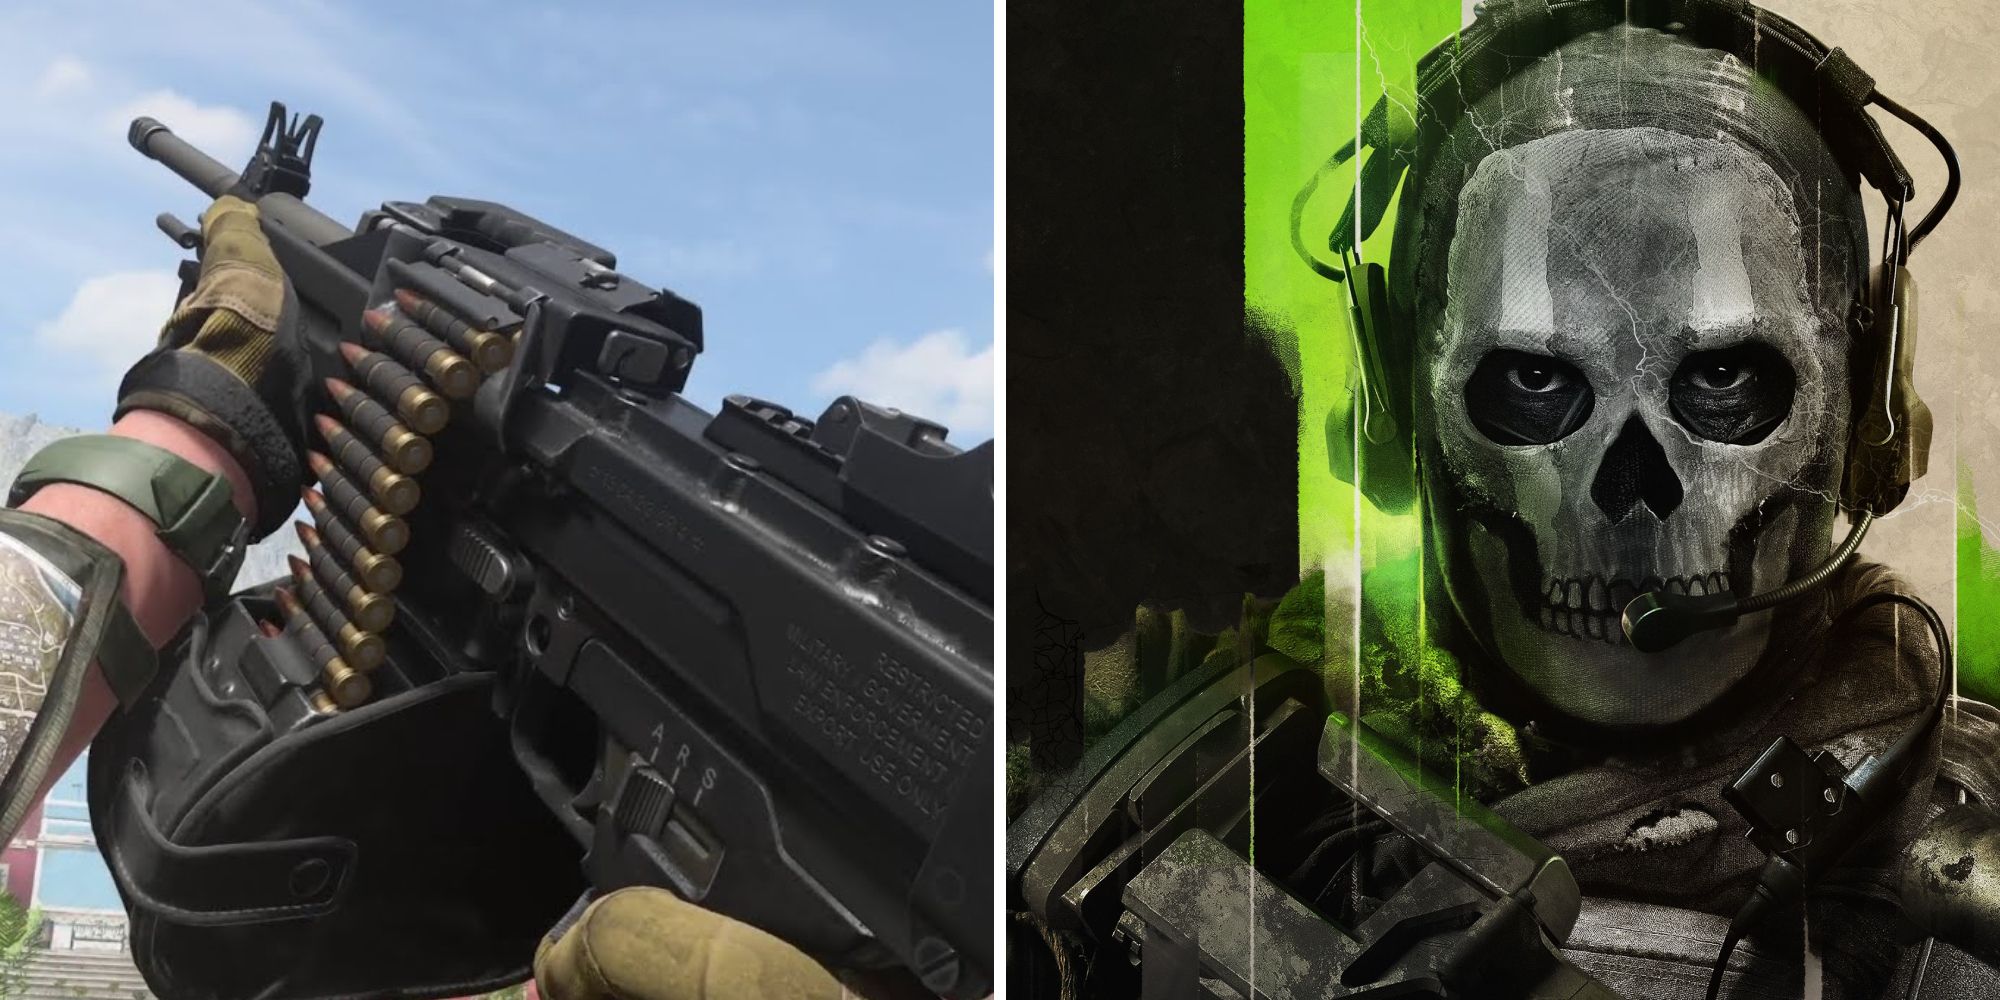 A split image of an LMG from Call Of Duty Modern Warfare 2. and the character Ghost wearing his signature skull mask.